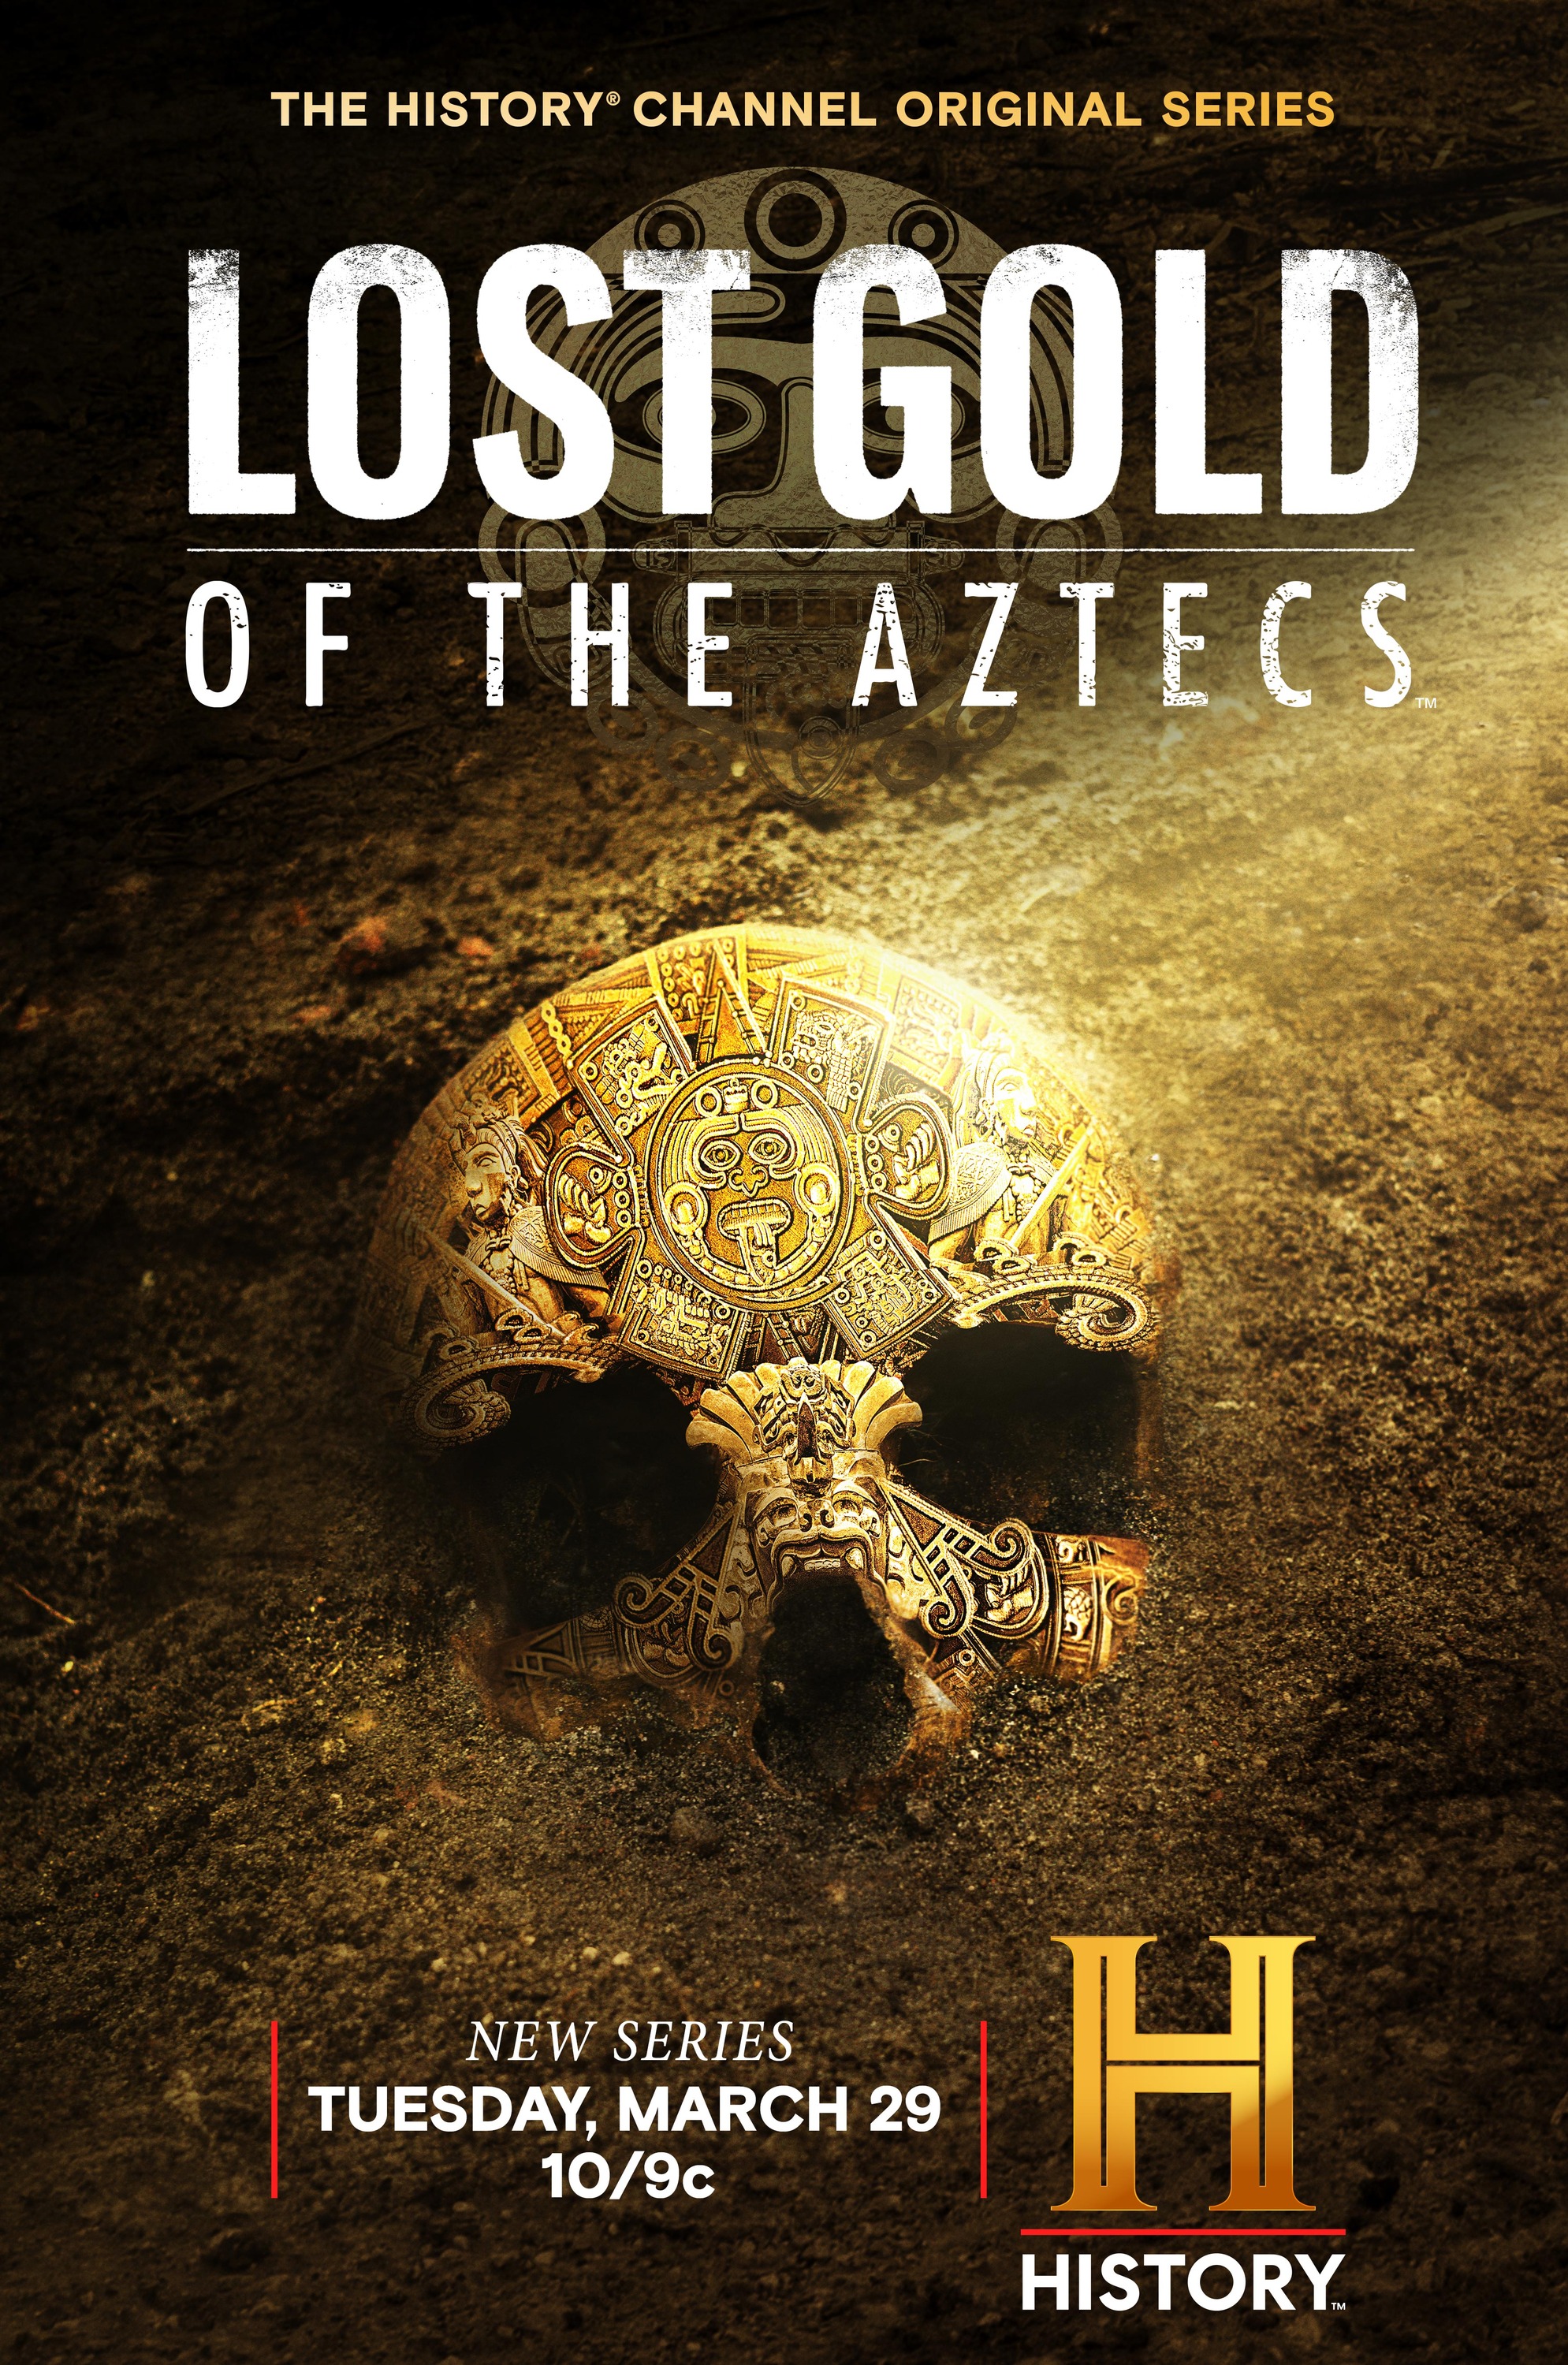 Mega Sized TV Poster Image for Lost Gold of the Aztecs (#1 of 2)